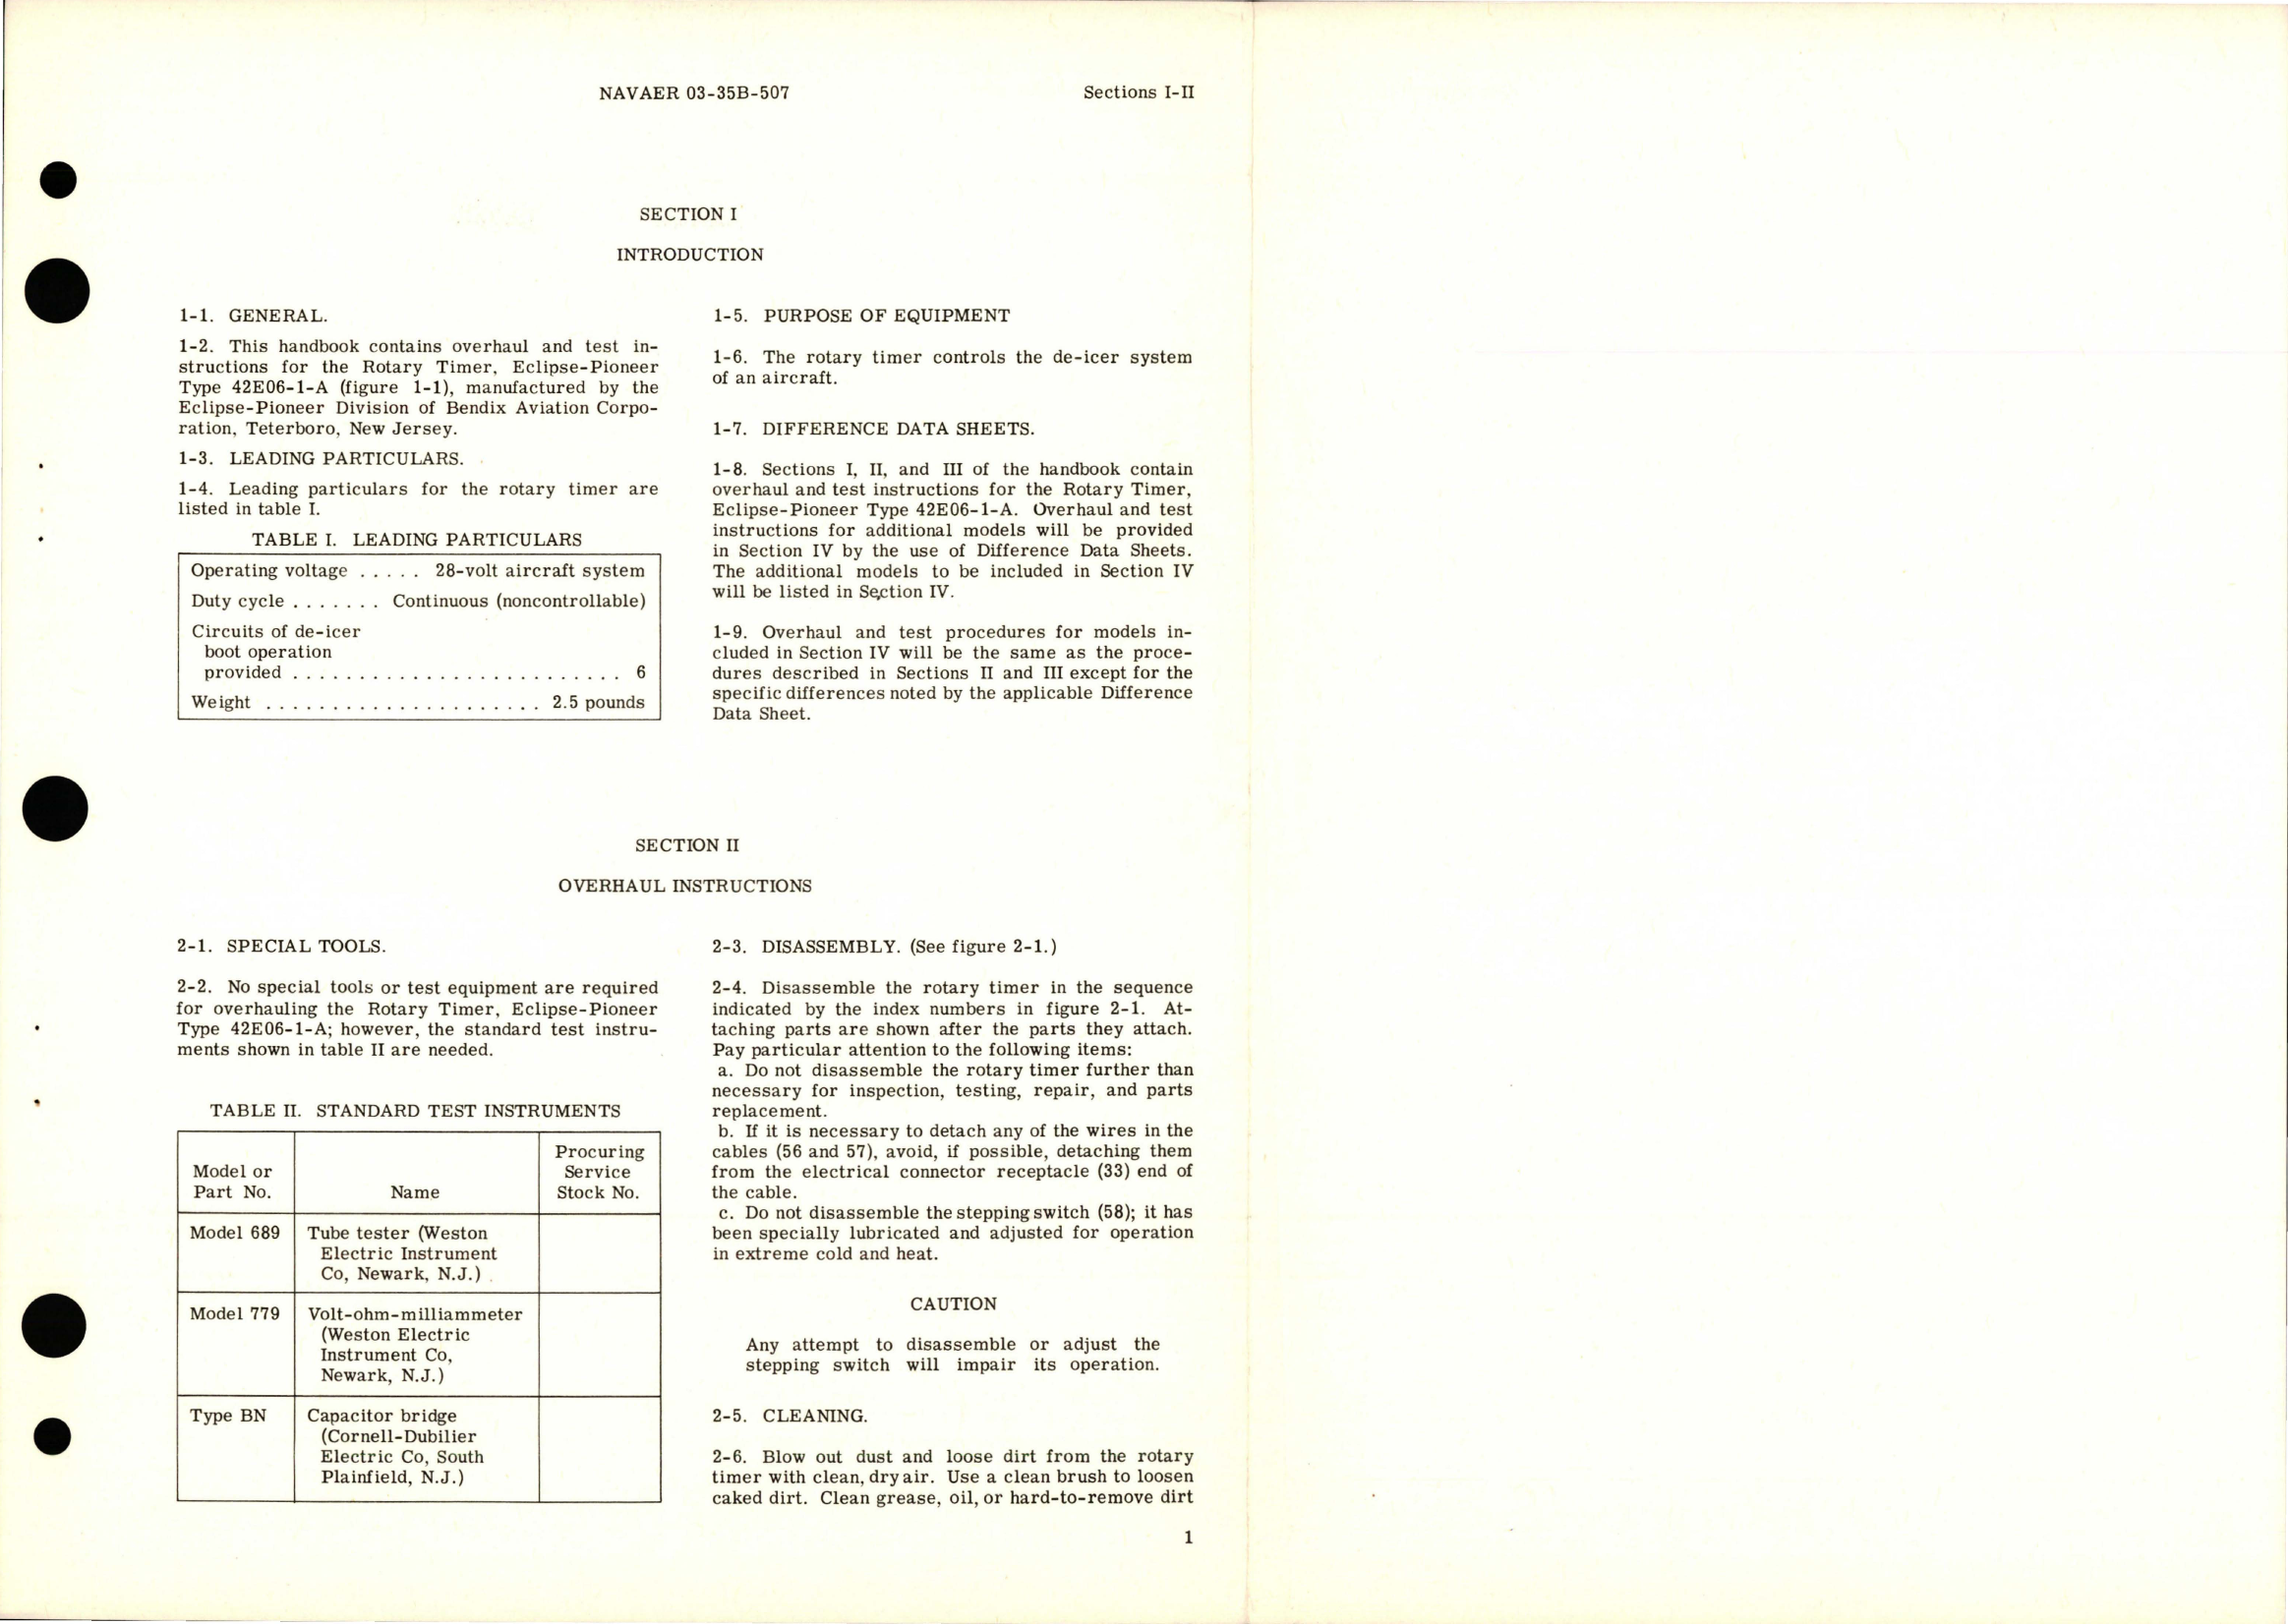 Sample page 5 from AirCorps Library document: Overhaul Instructions for Rotary Timer - Type 42E06-1-A